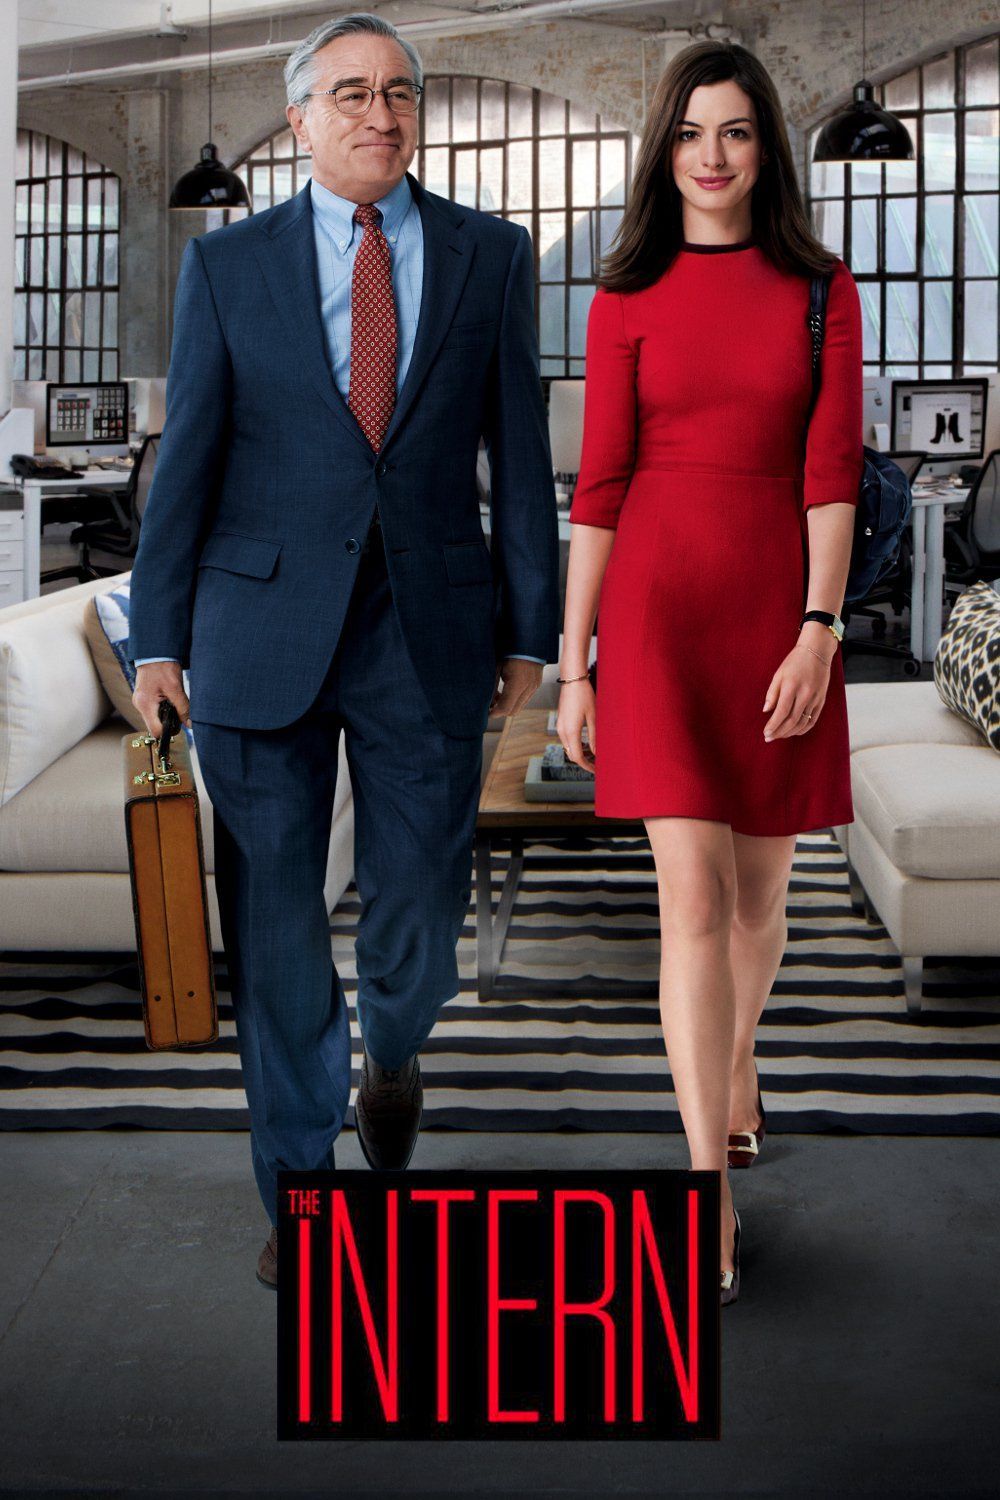 The Intern (PG 13; 122 Minutes). We're Screening The Film On April 2016 At 12PM In The Lovell Room. The Intern Movie, Streaming Movies, HD Movies